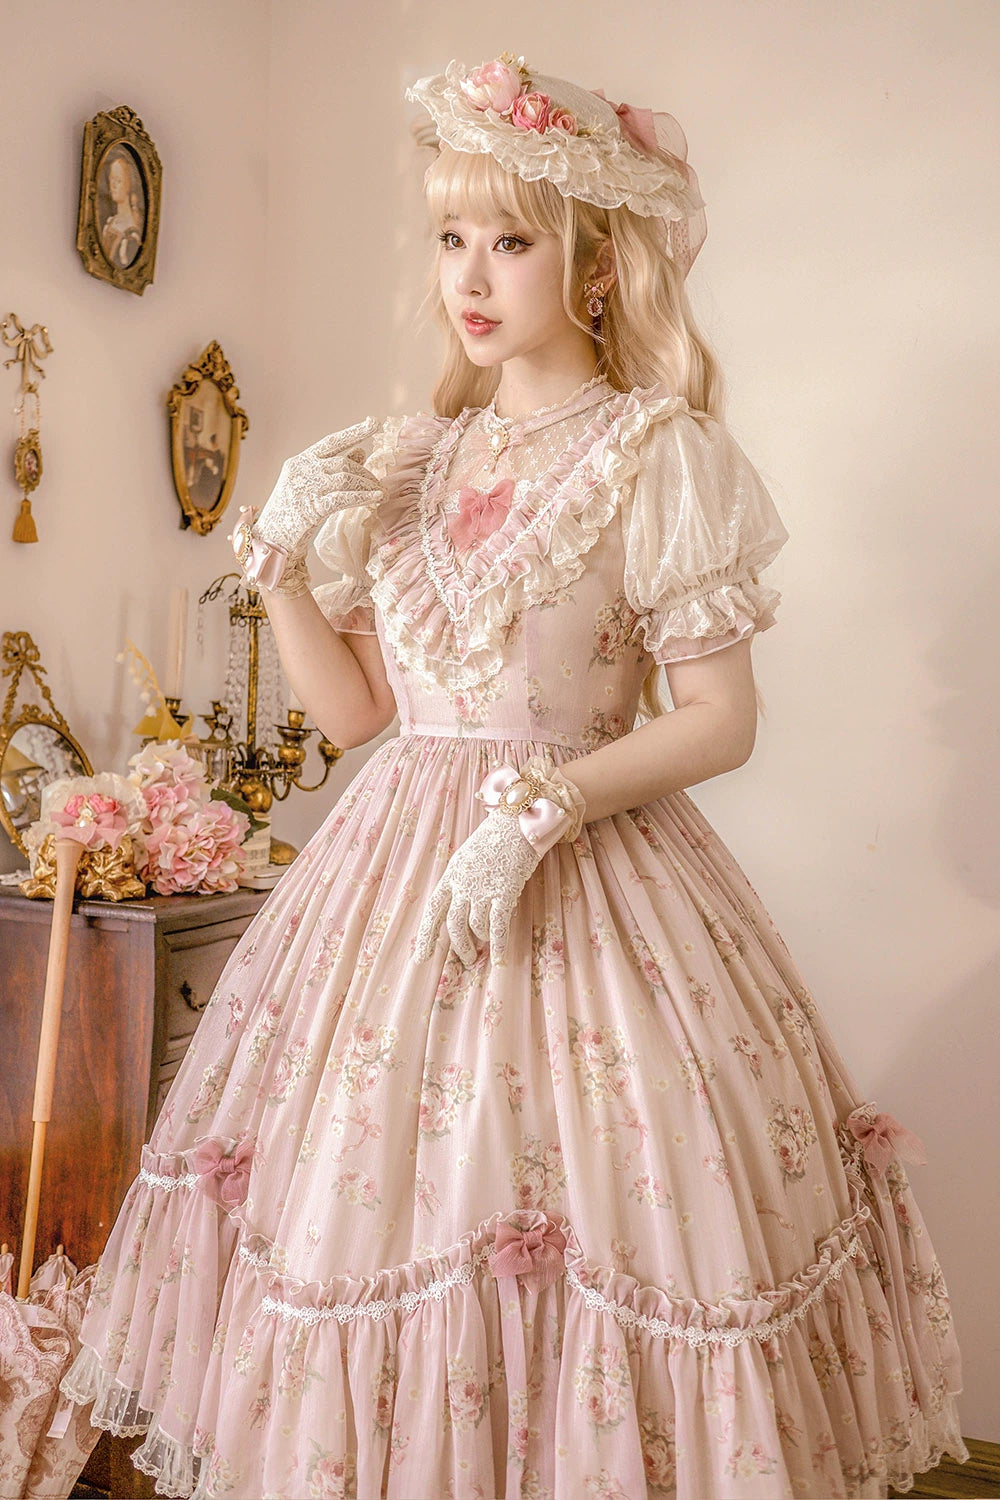 [Pre-orders available until 4/28] Daydream Rosa Classical rose-patterned dress